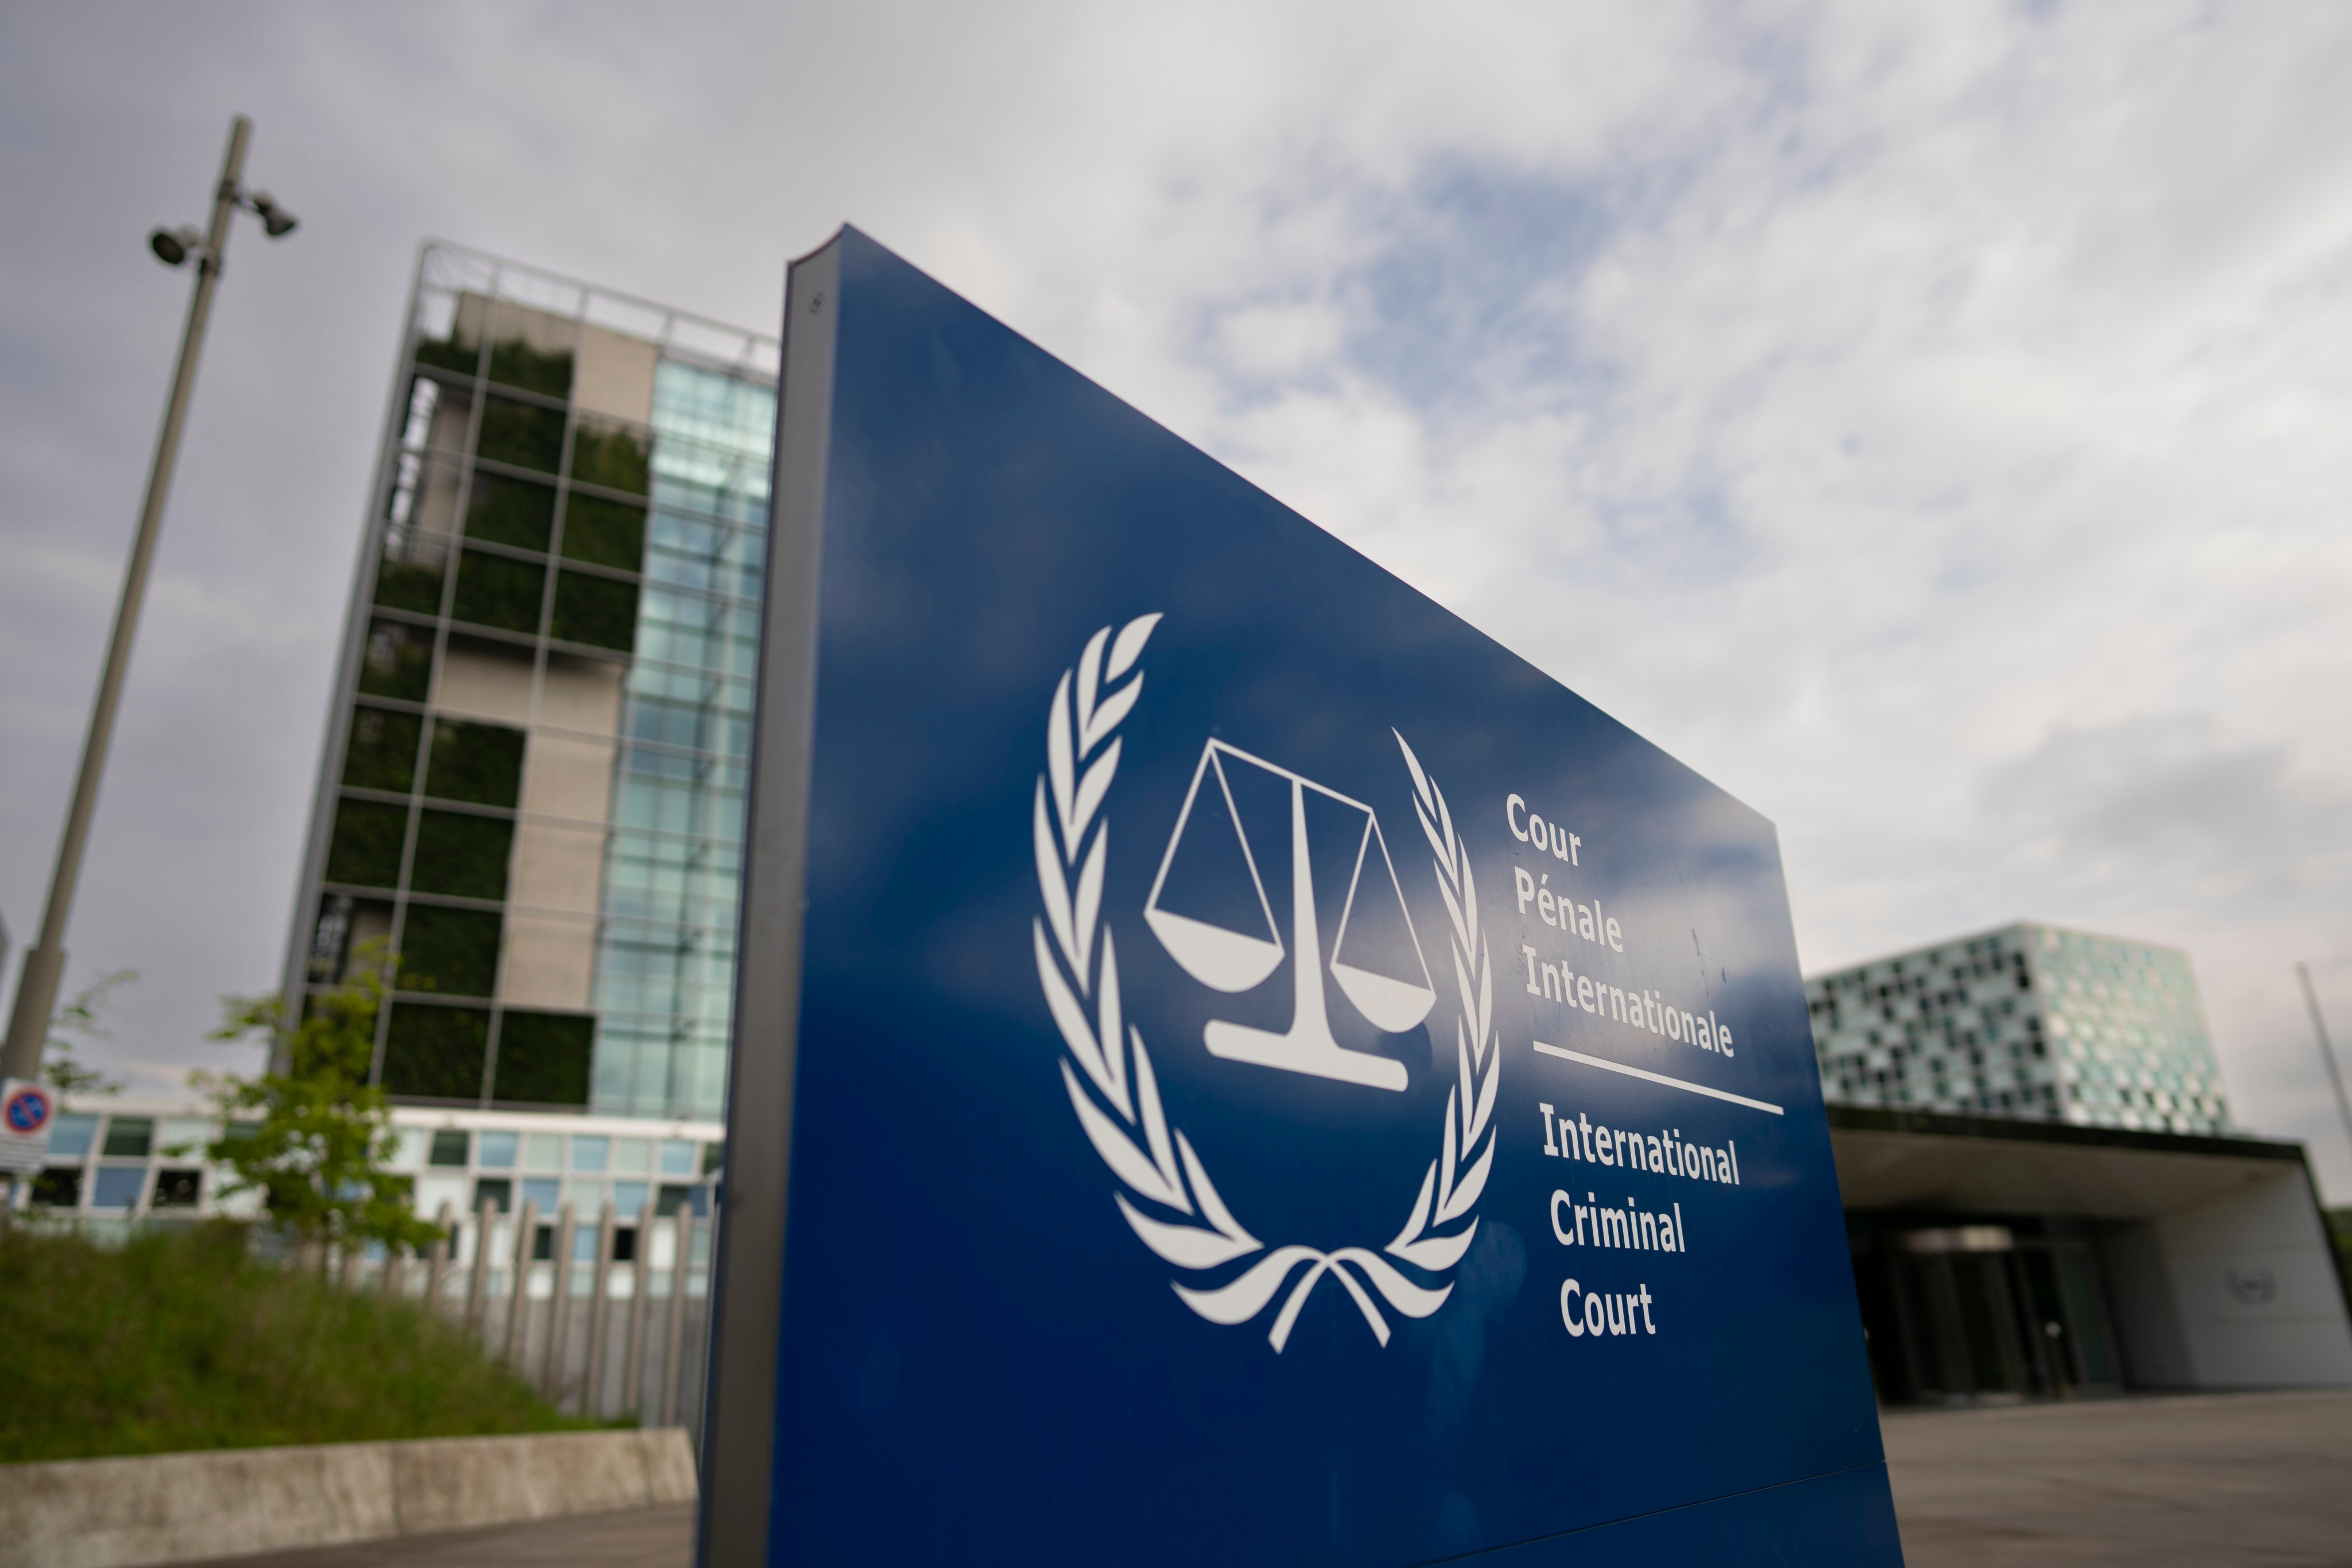 The International Criminal Court in The Hague, Netherlands. Photo: AP